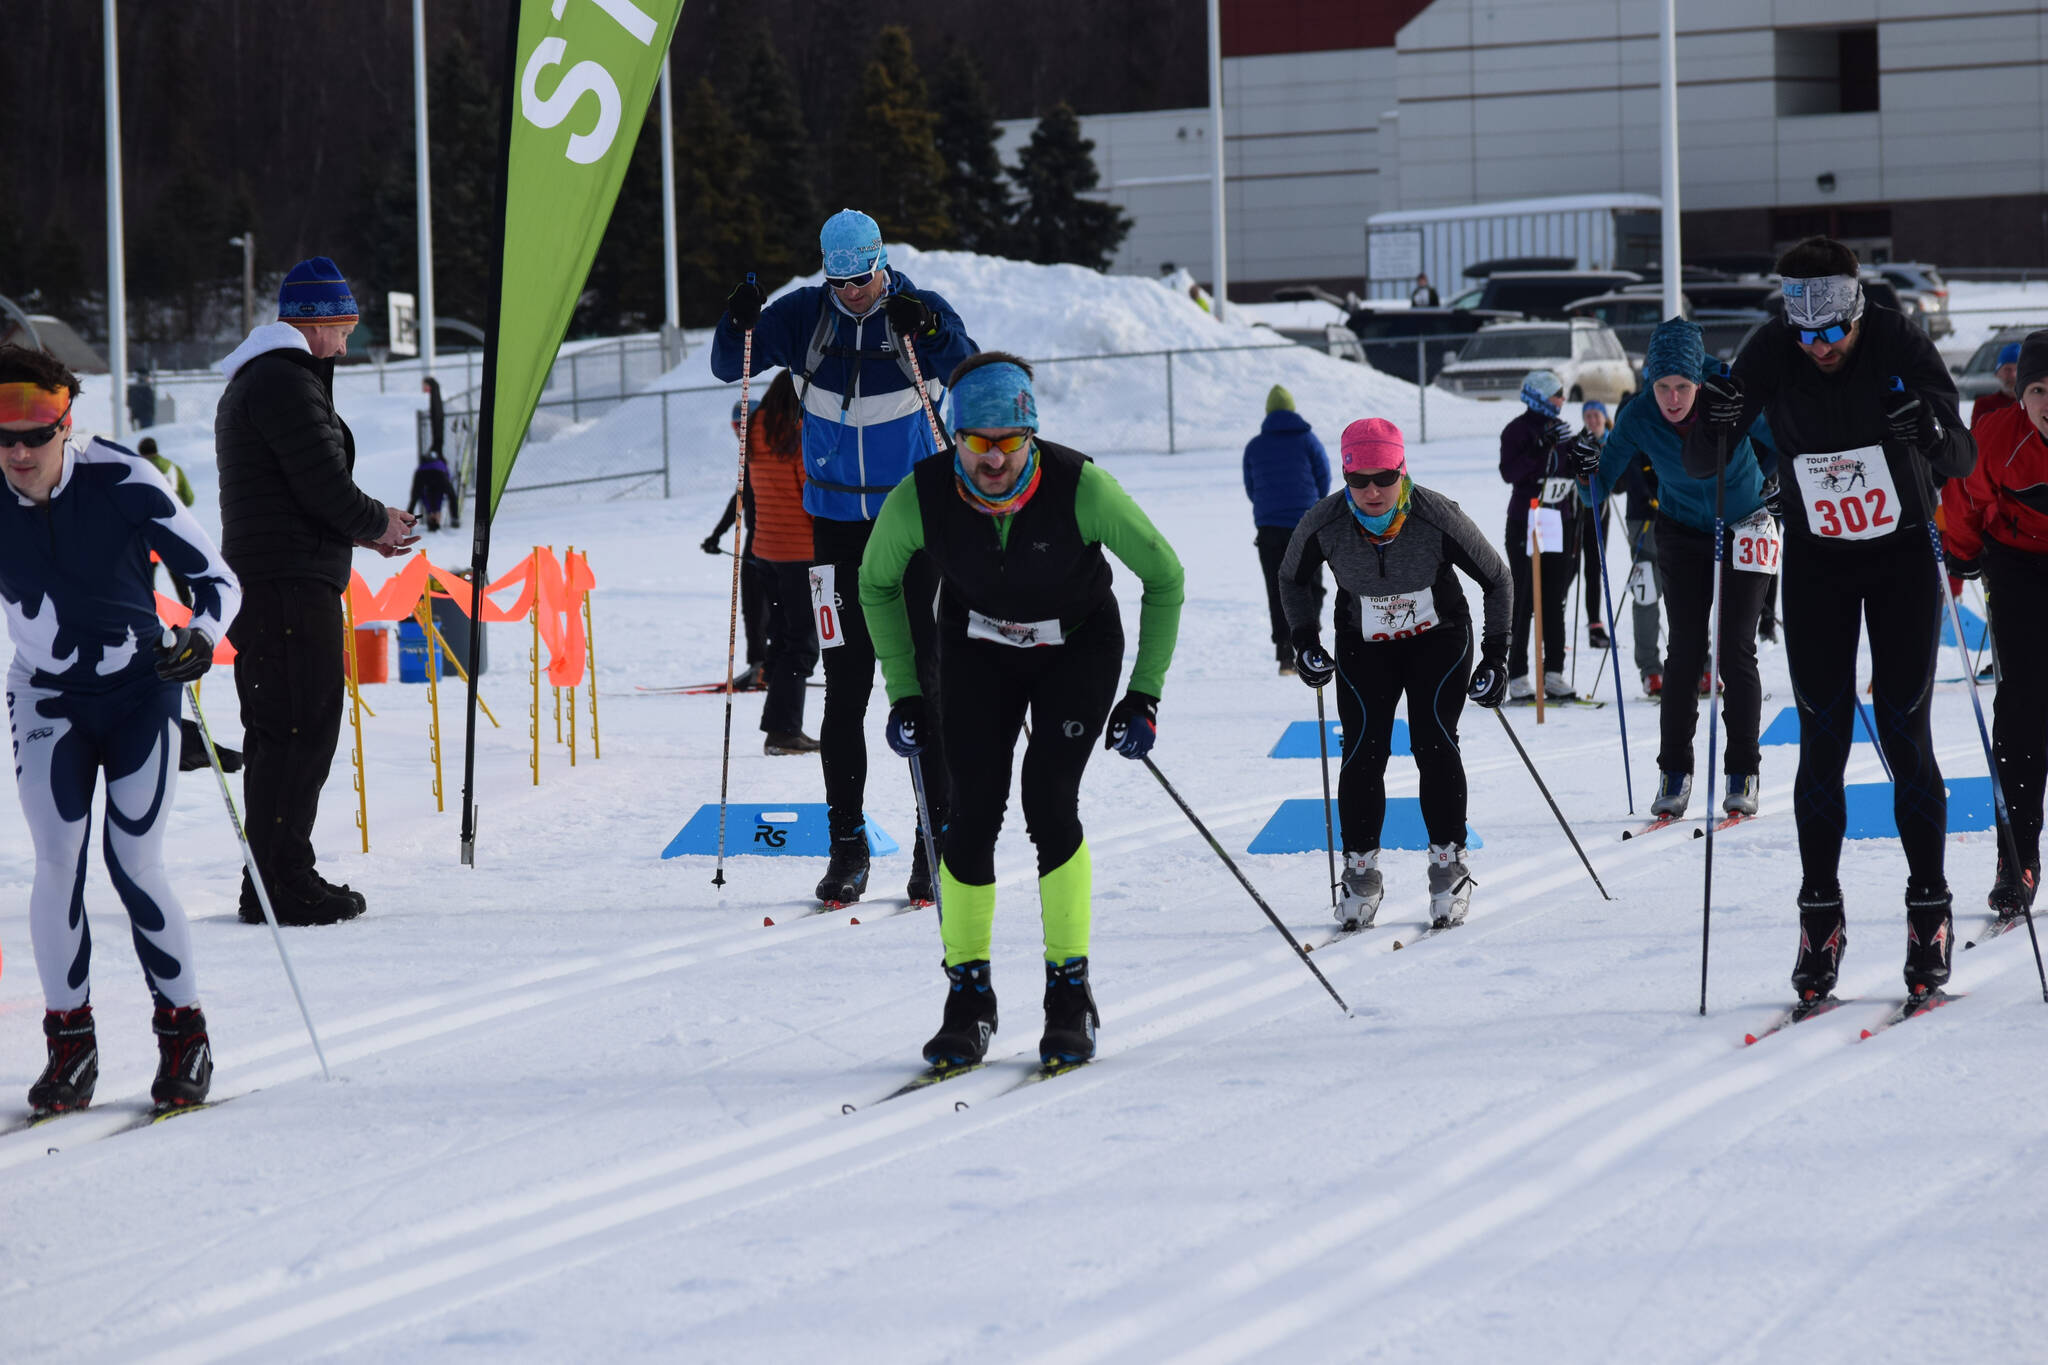 Camille Botello/Peninsula Clarion 
Skiers take off for the men’s 40K freestyle race at Sunday’s Tour of Tsalteshi event just outside of Soldotna on Sunday, Feb. 20, 2022.